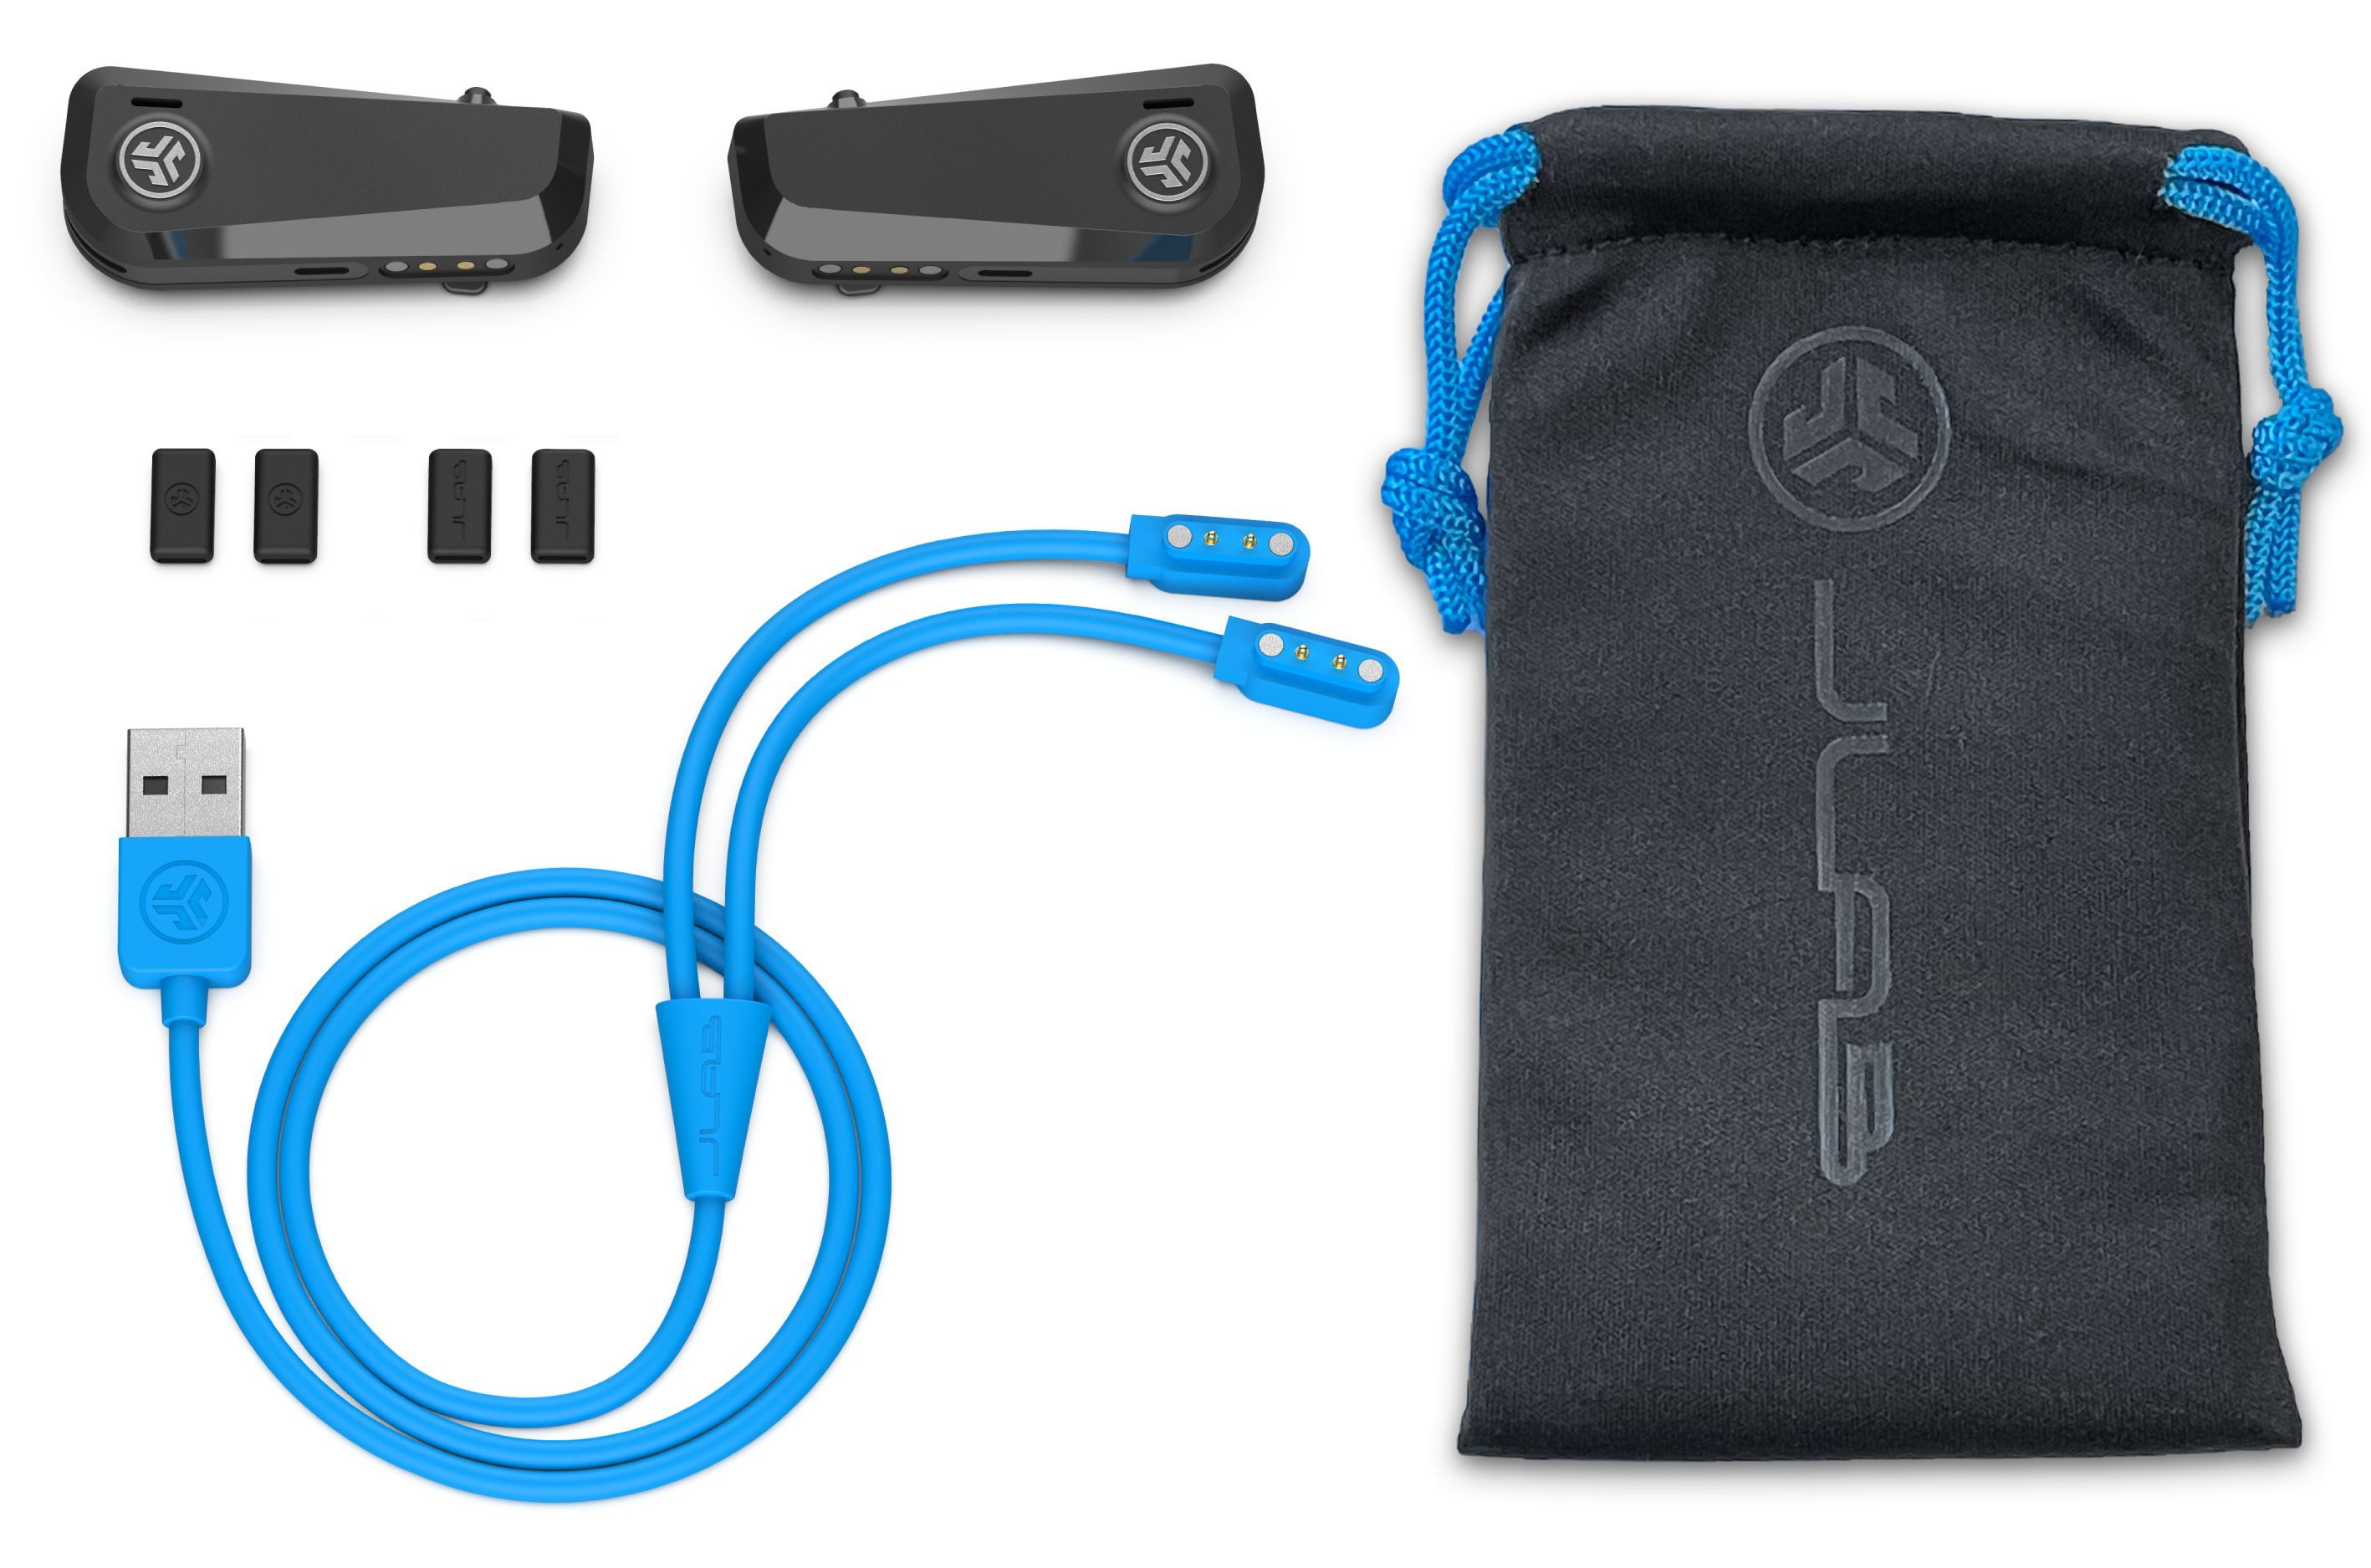 JLab Audio JBuds Frames with two pairs of silicone sleeves, proprietary charging cable, and drawstring carrying bag.